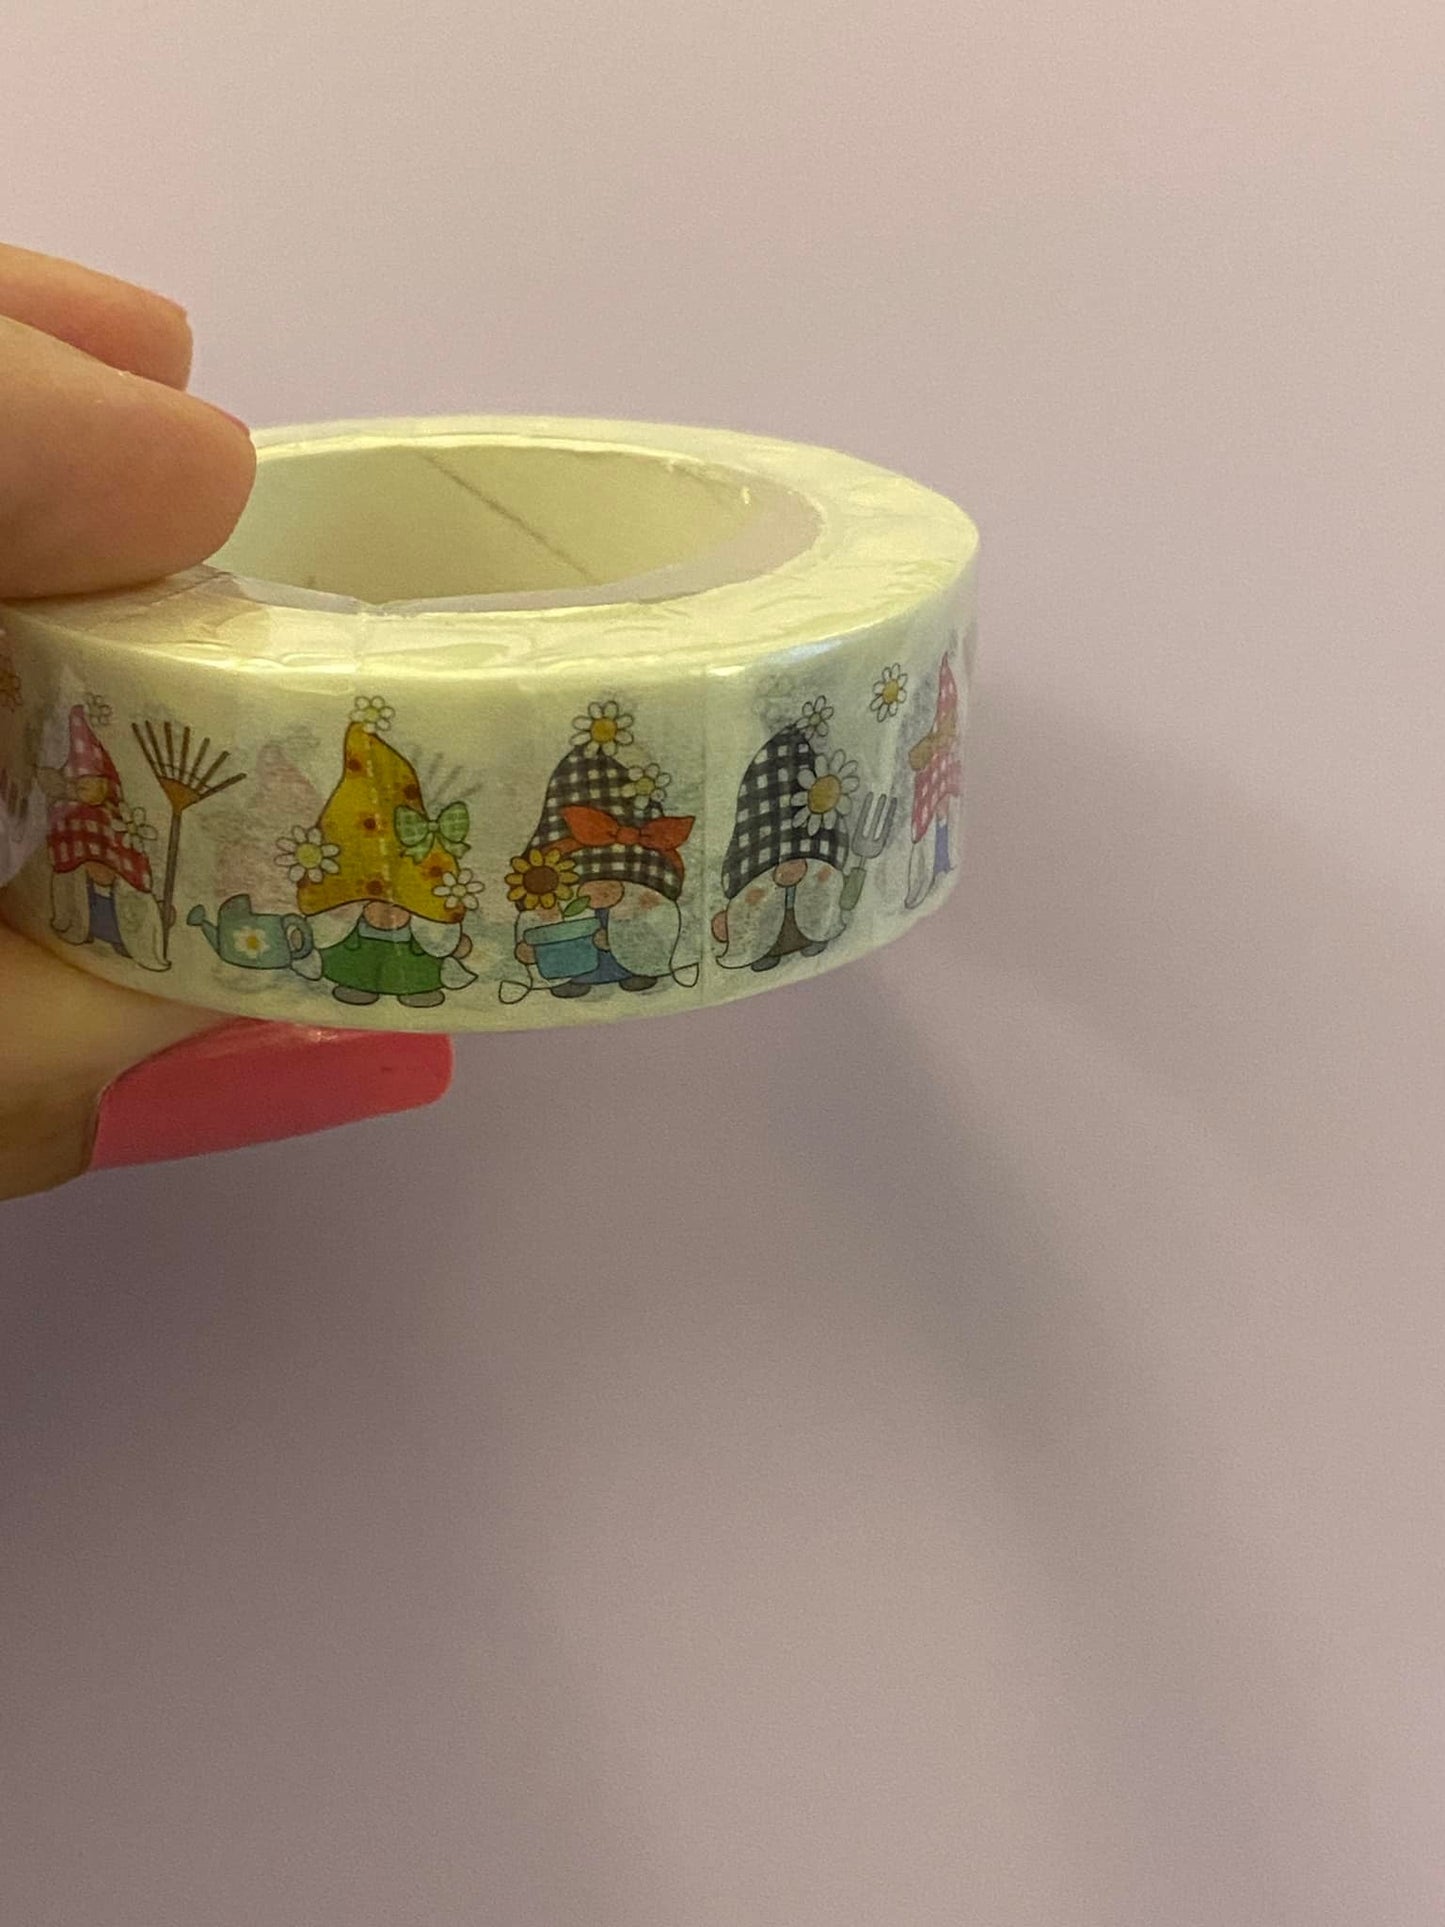 Big Roll of Garden Gnomes with Sunflowers Washi Tapes